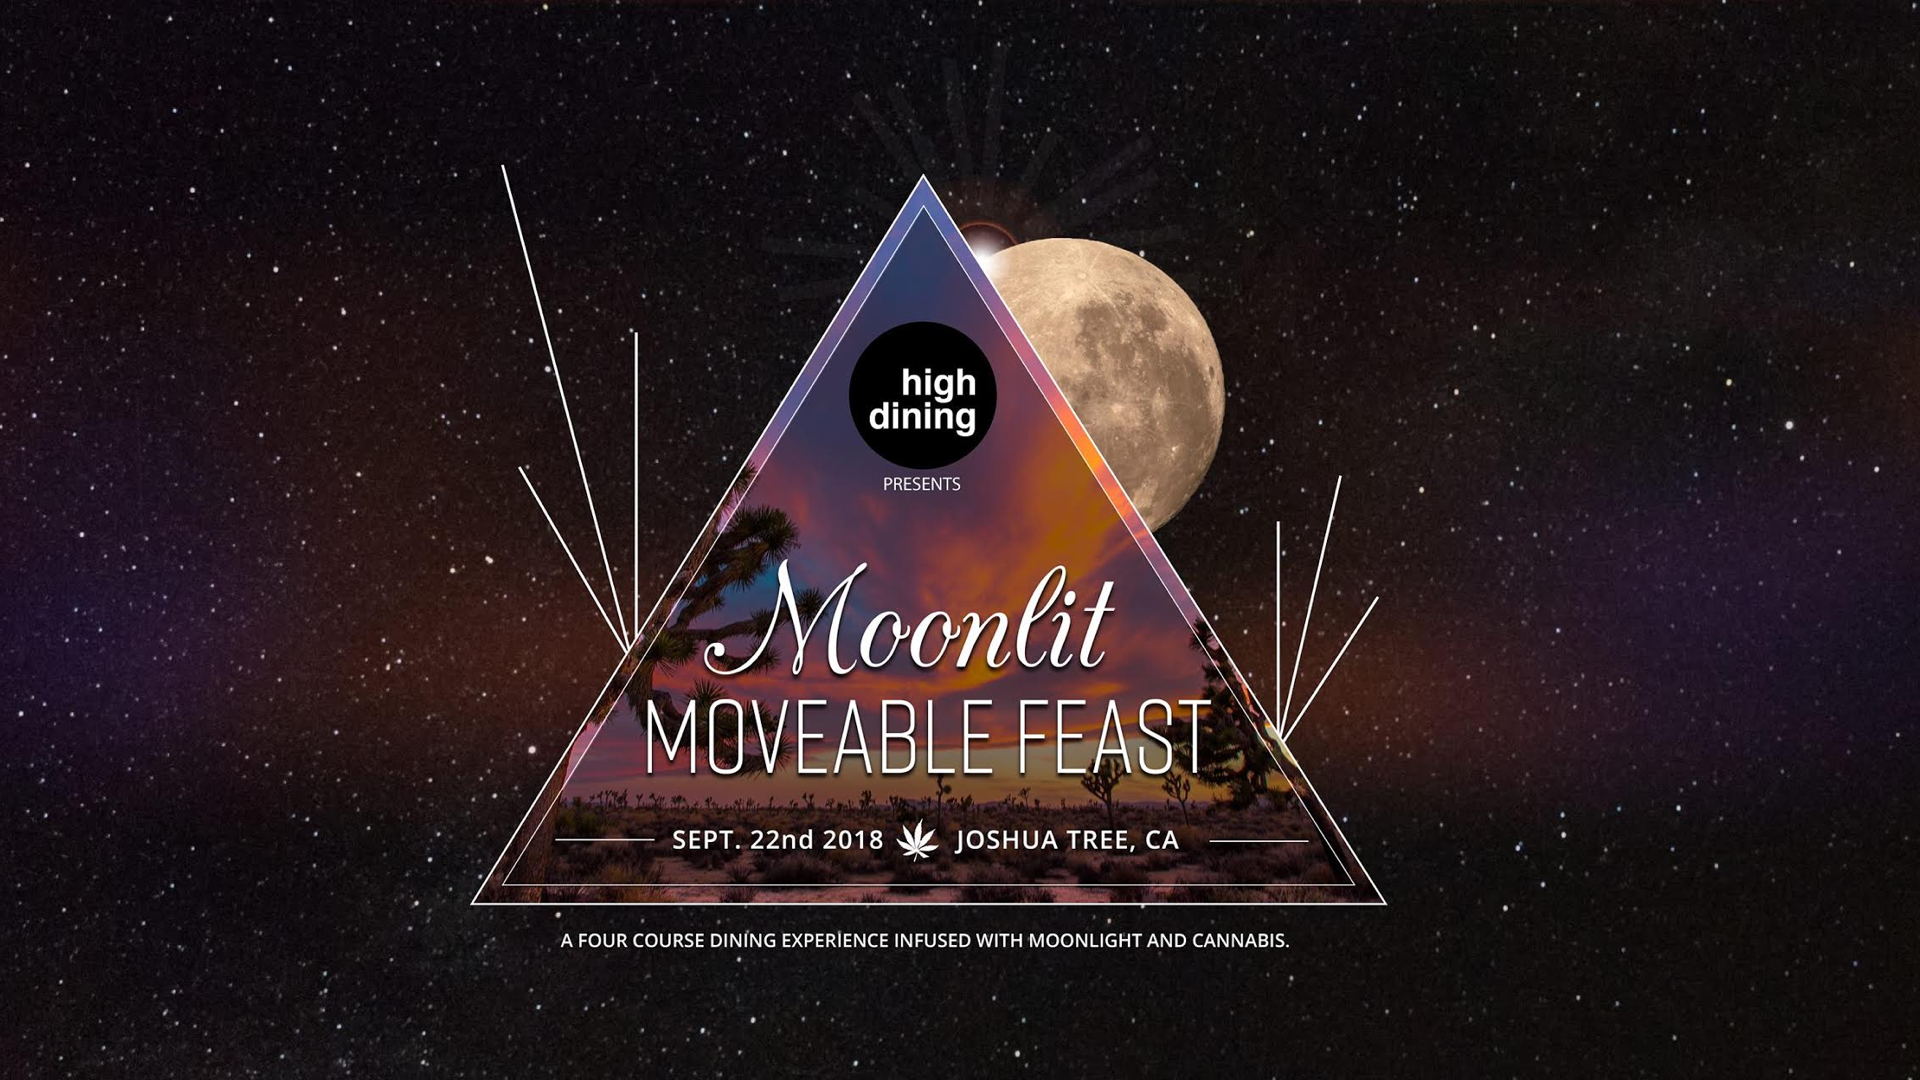 Moonlit Moveable Feast